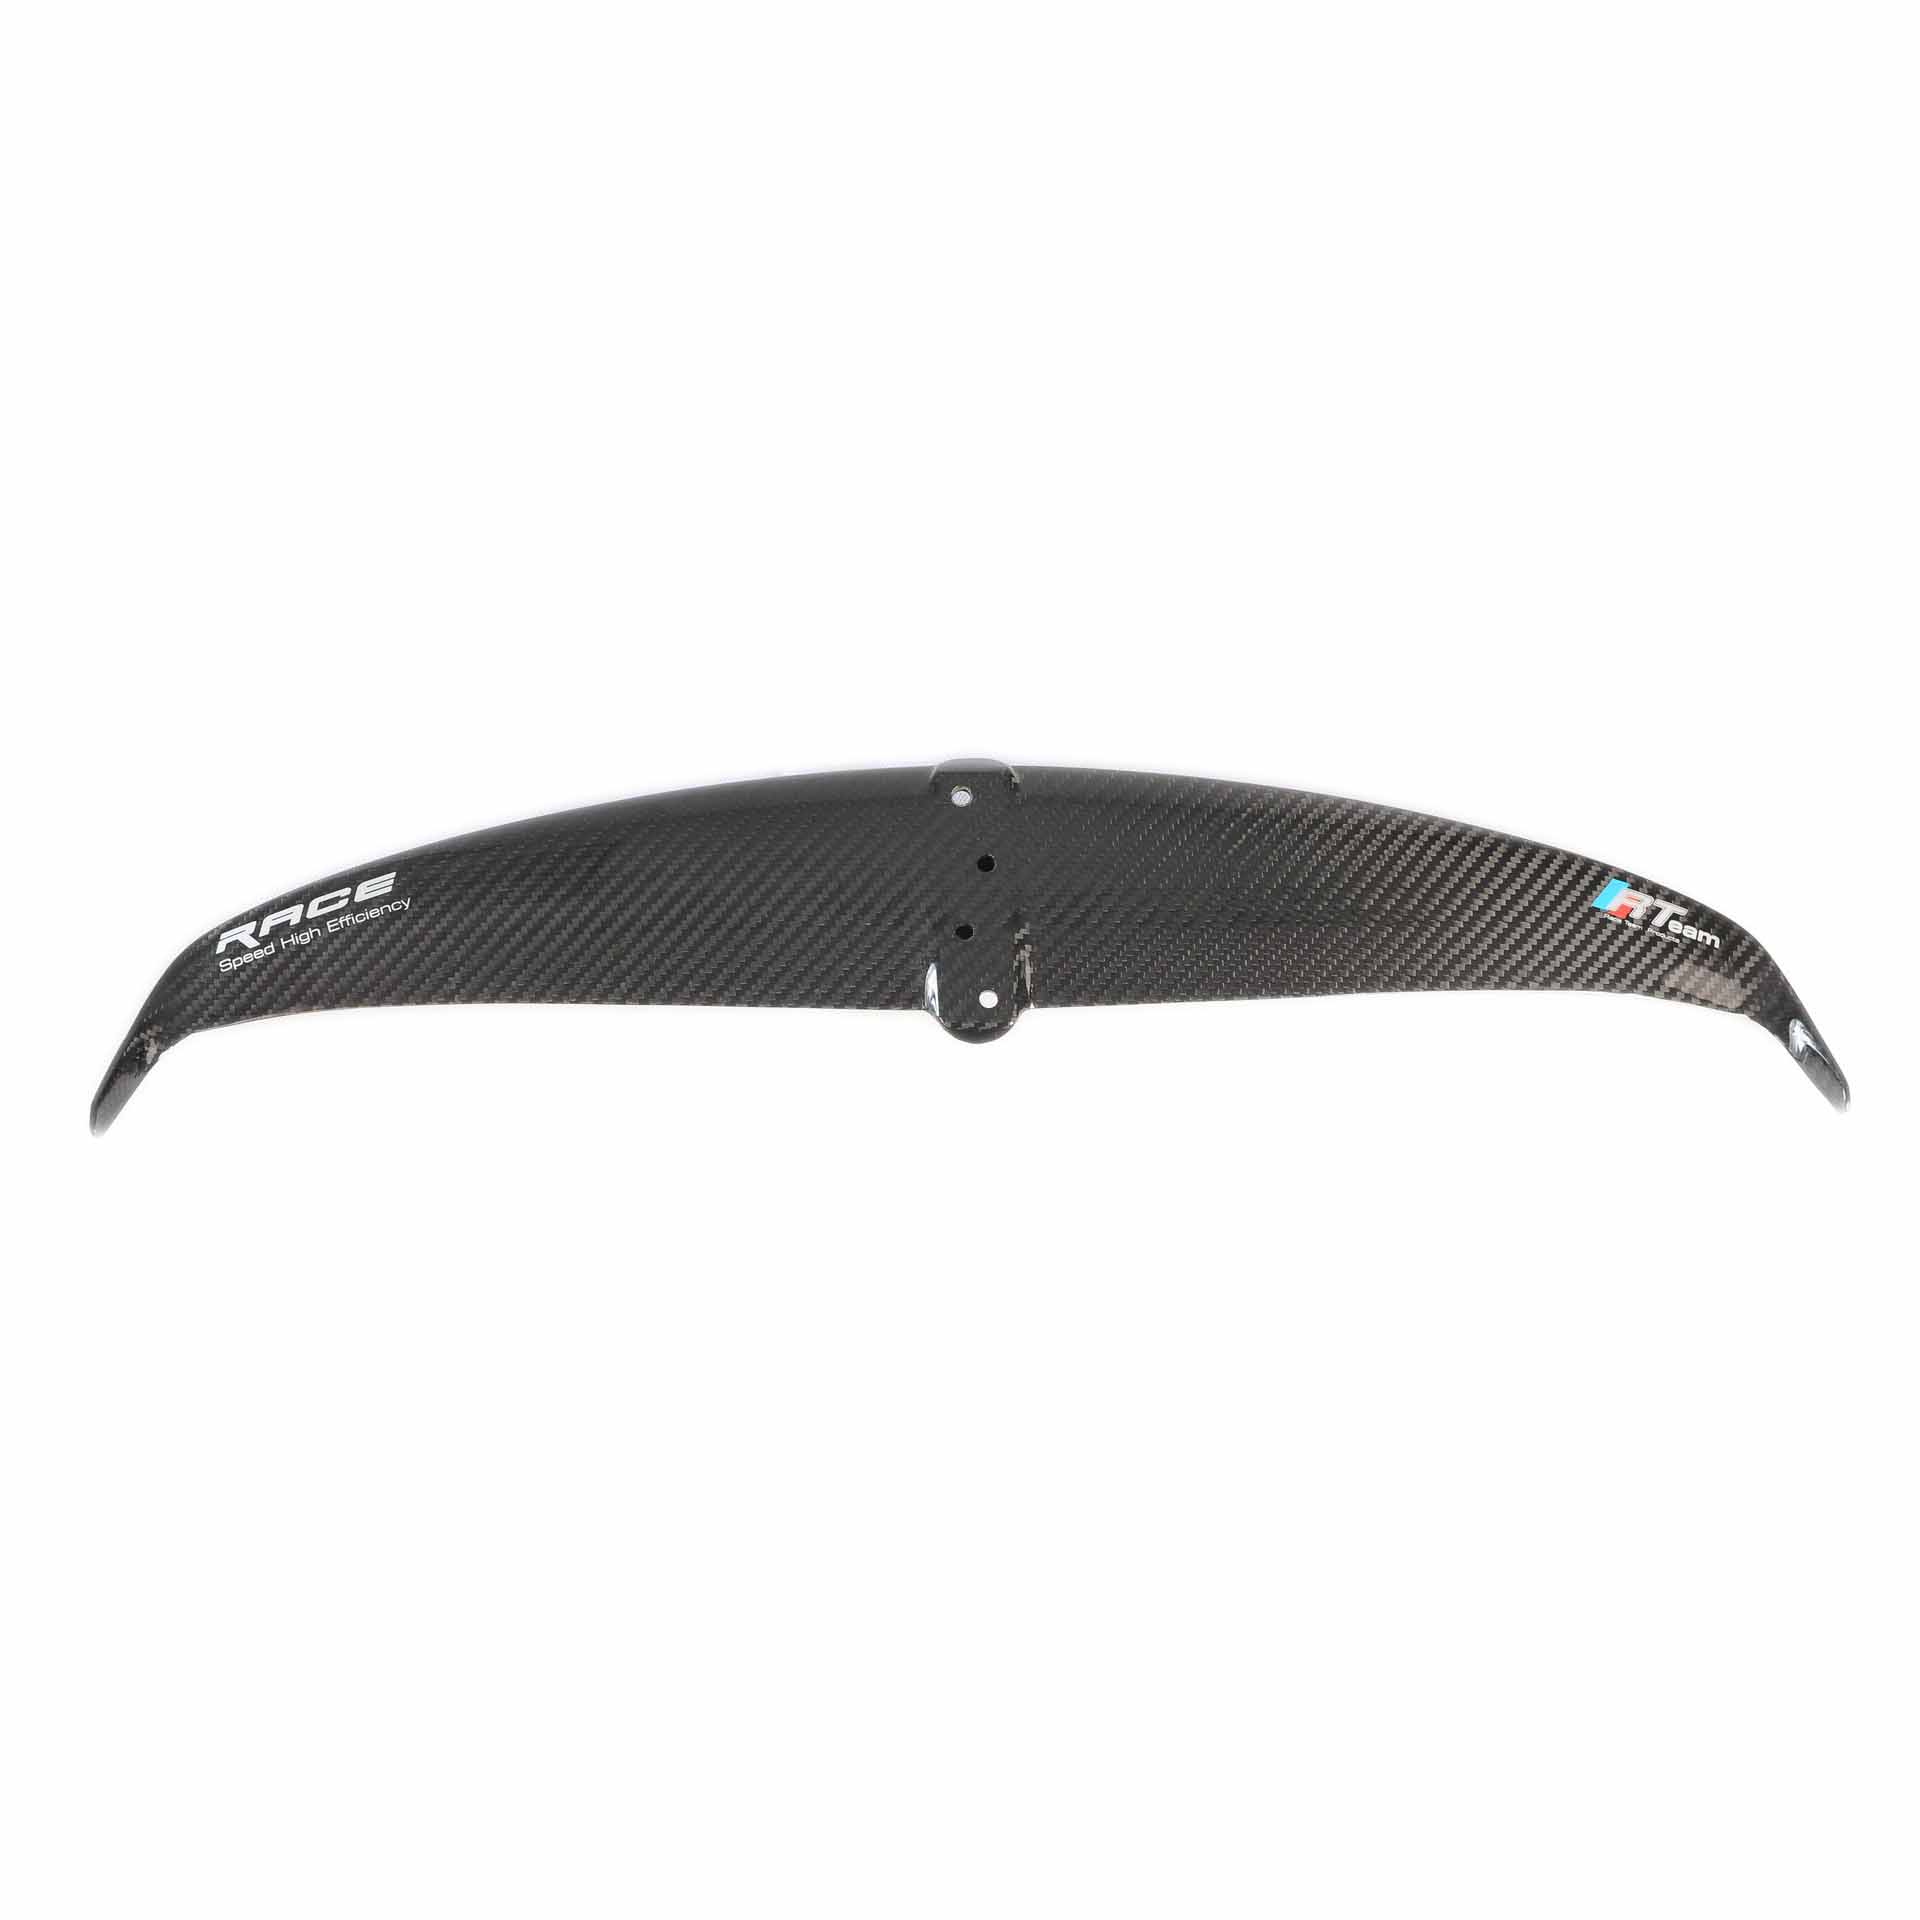 Aile kitefoil race wing winglets full carbon gloss